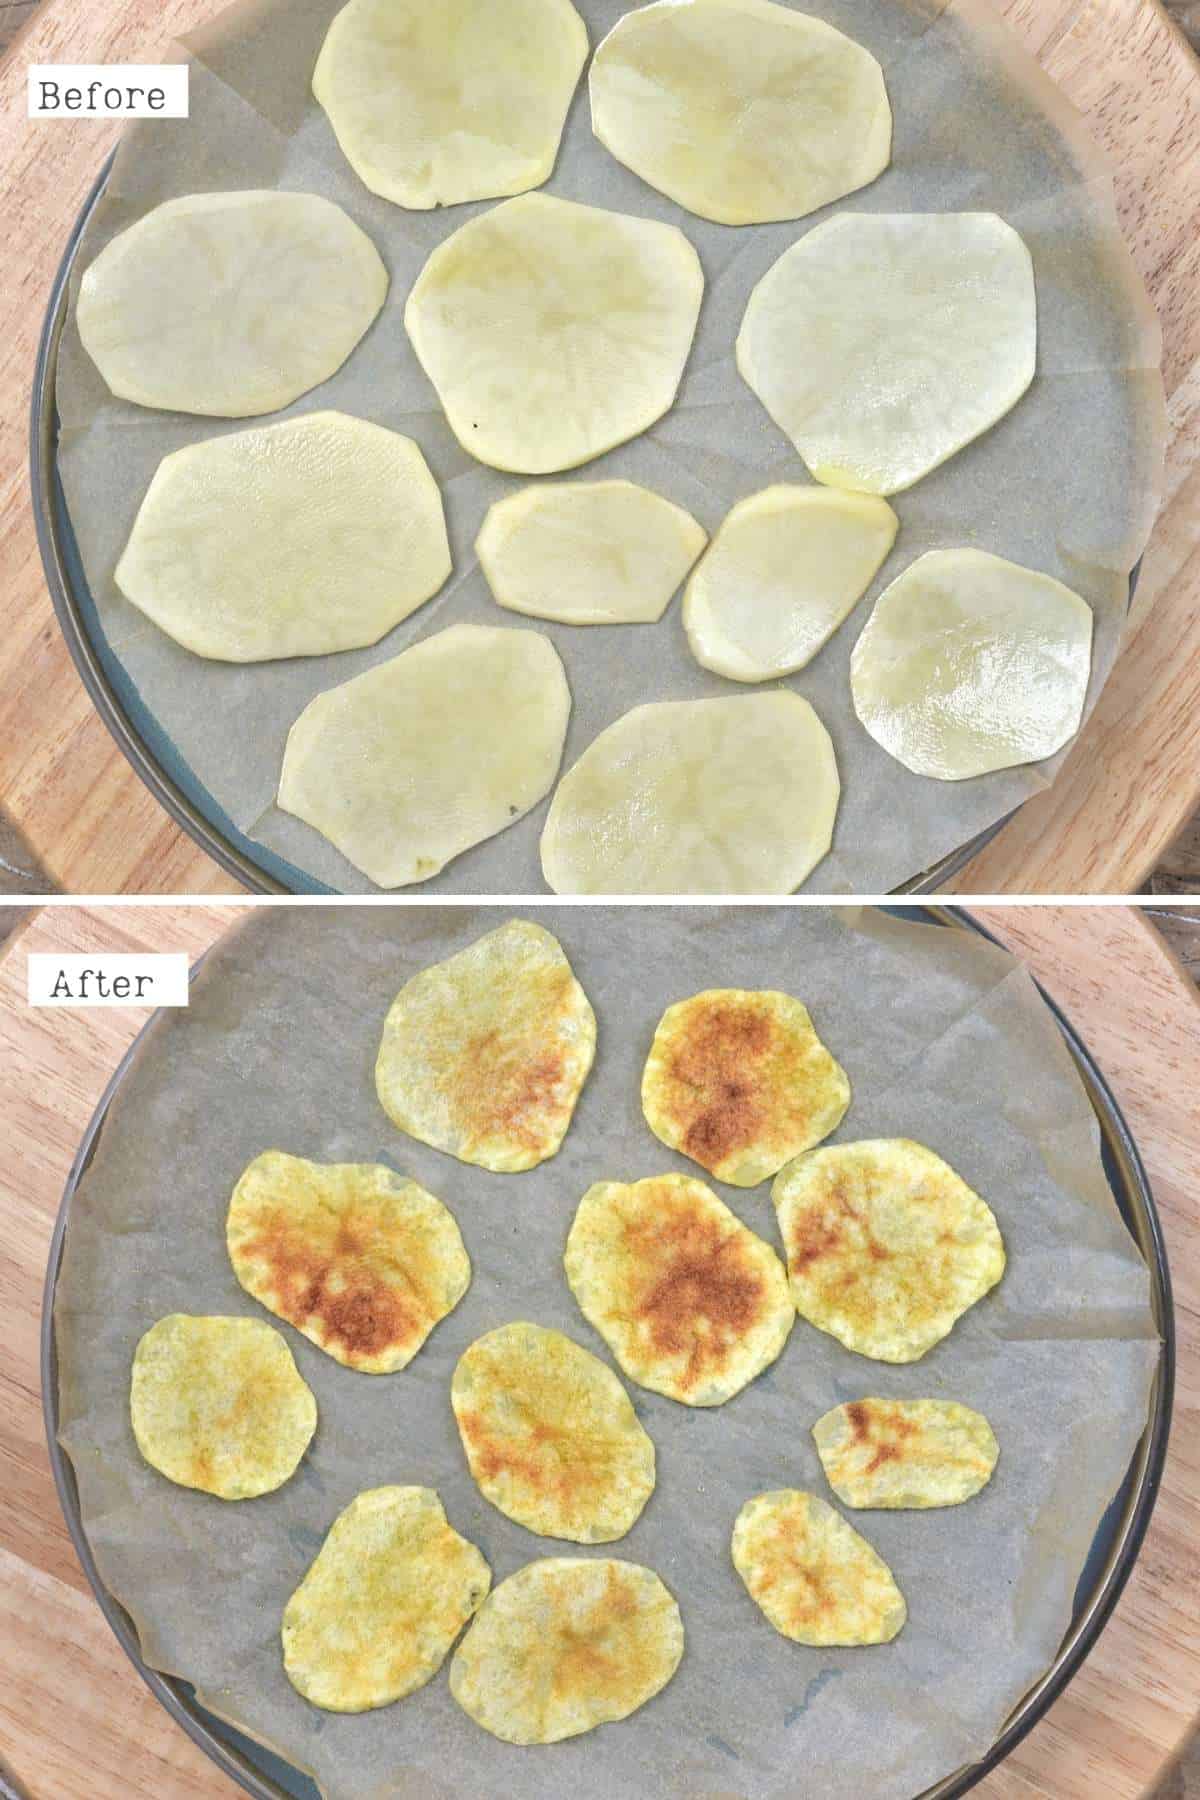 Before and after making potato chips